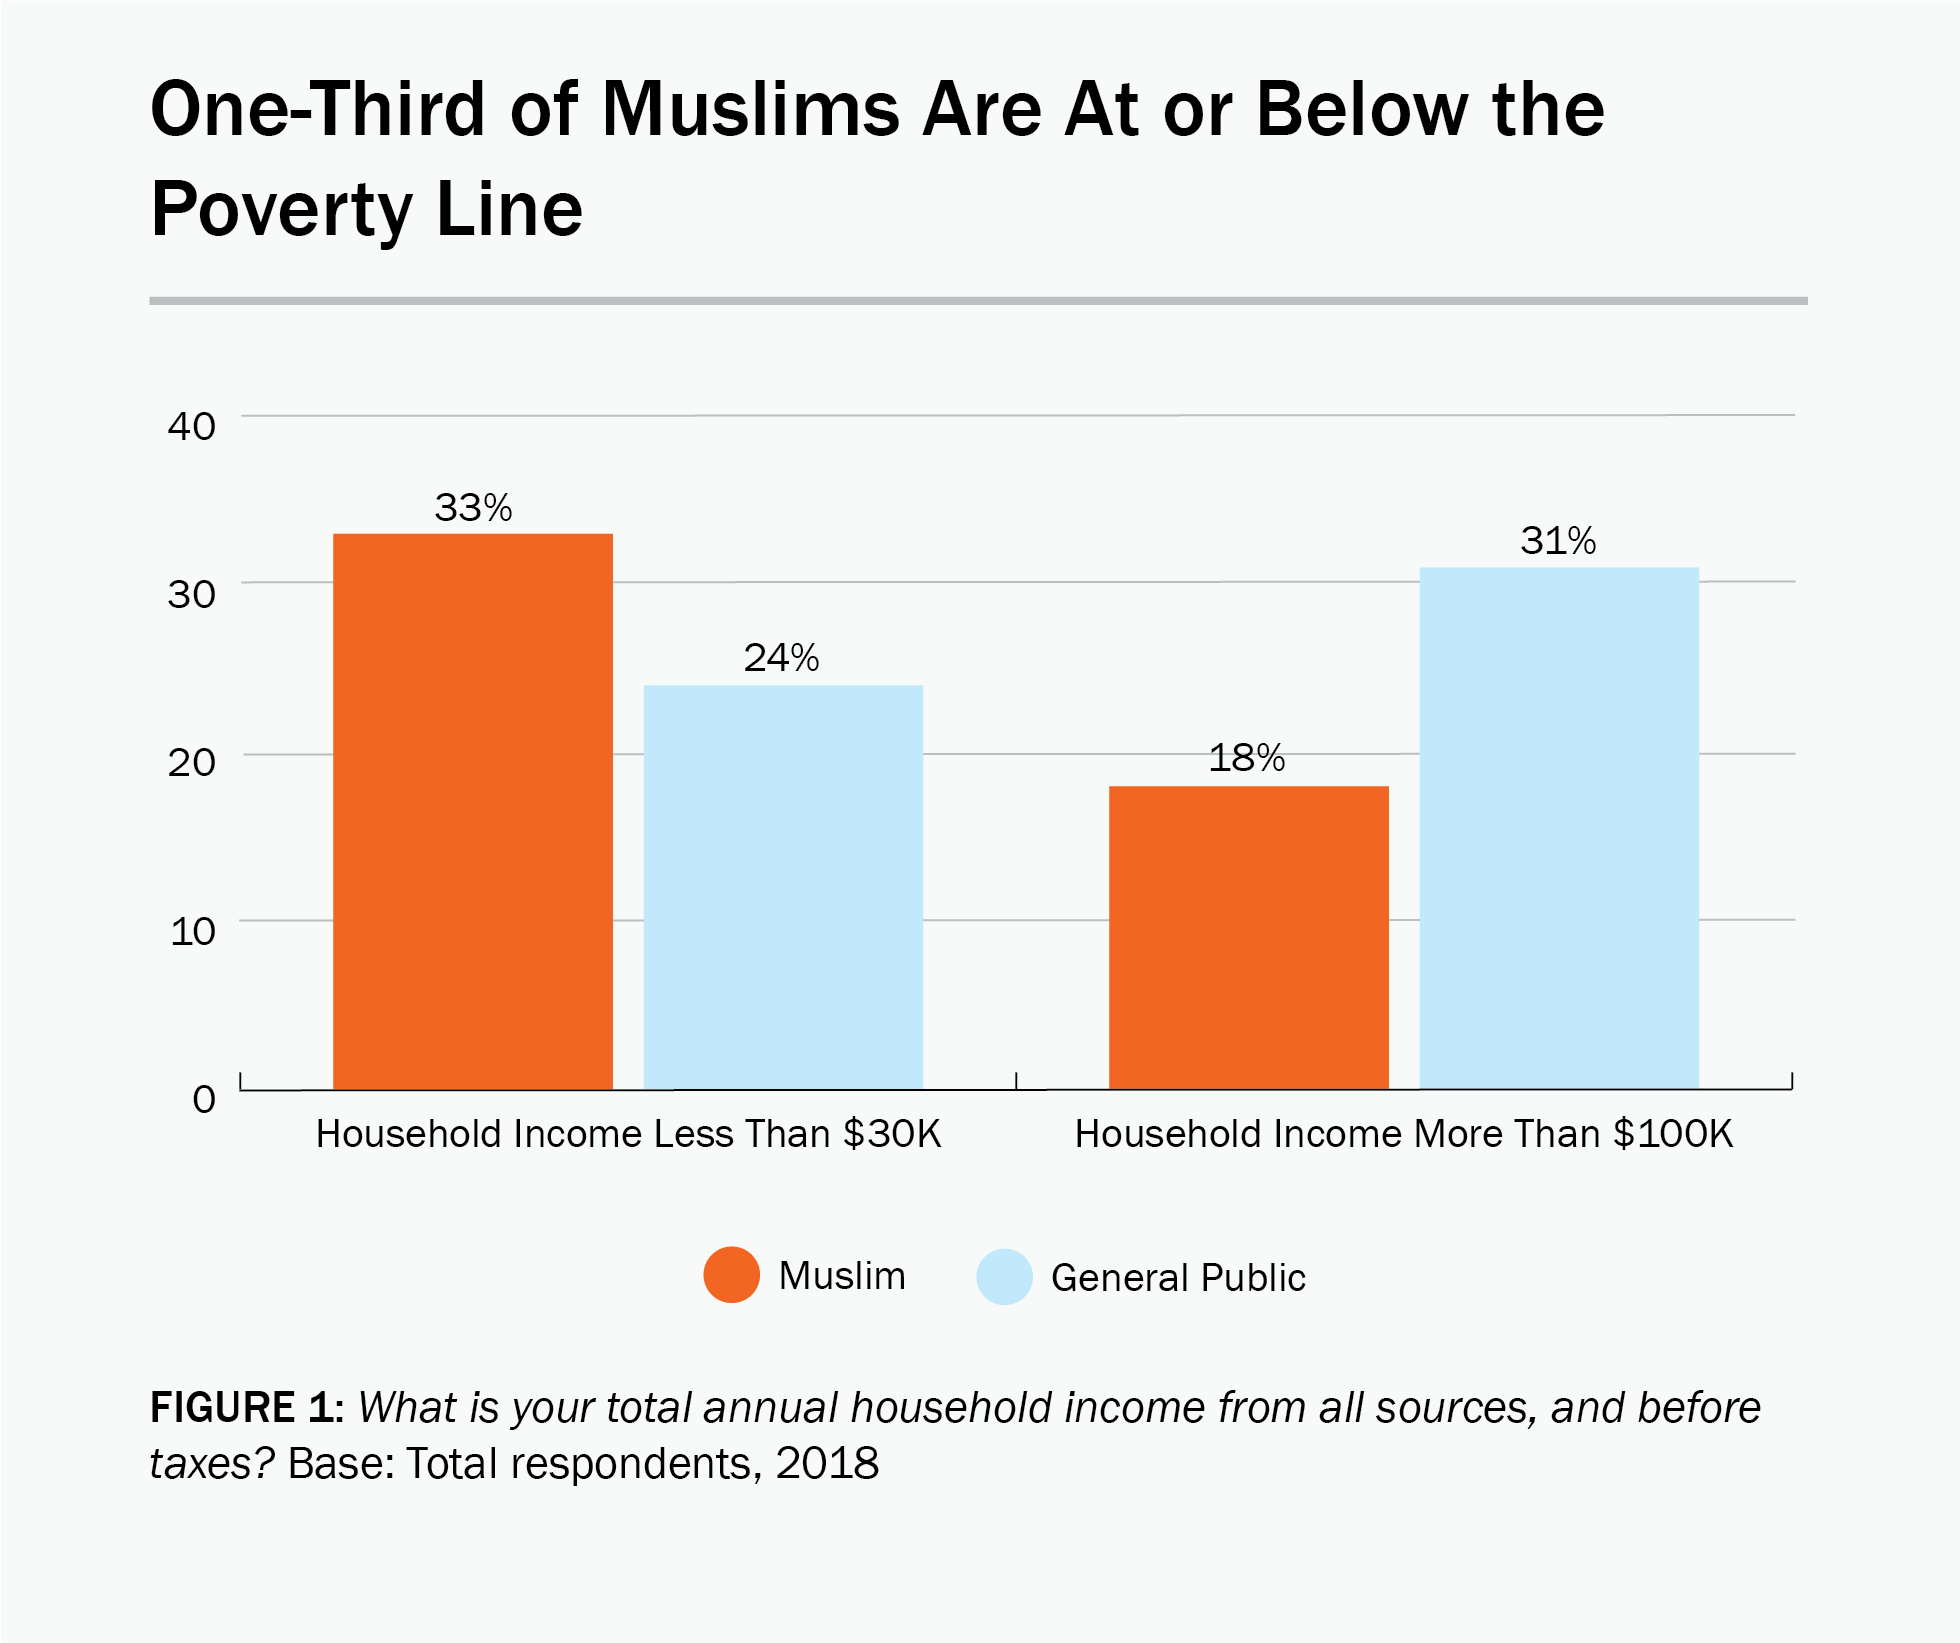 Figure 1: A bar graph showing that one-third of Muslims are at or below the poverty line